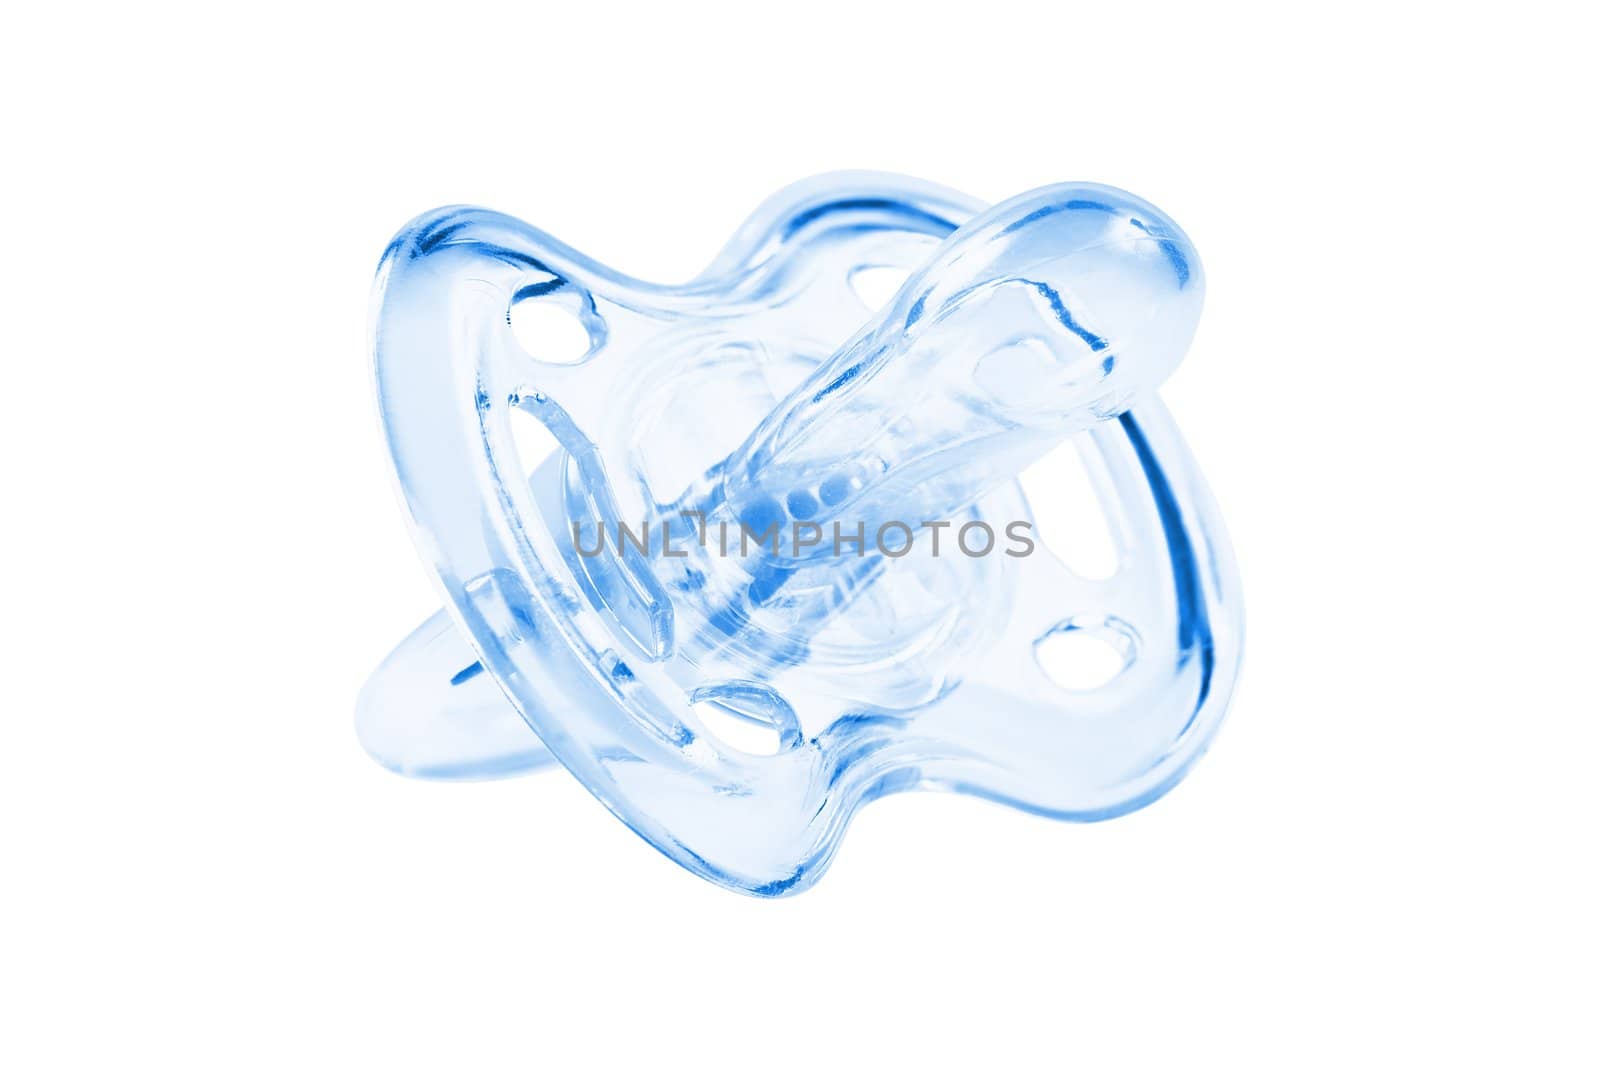 Blue pacifier. Isolated on white background